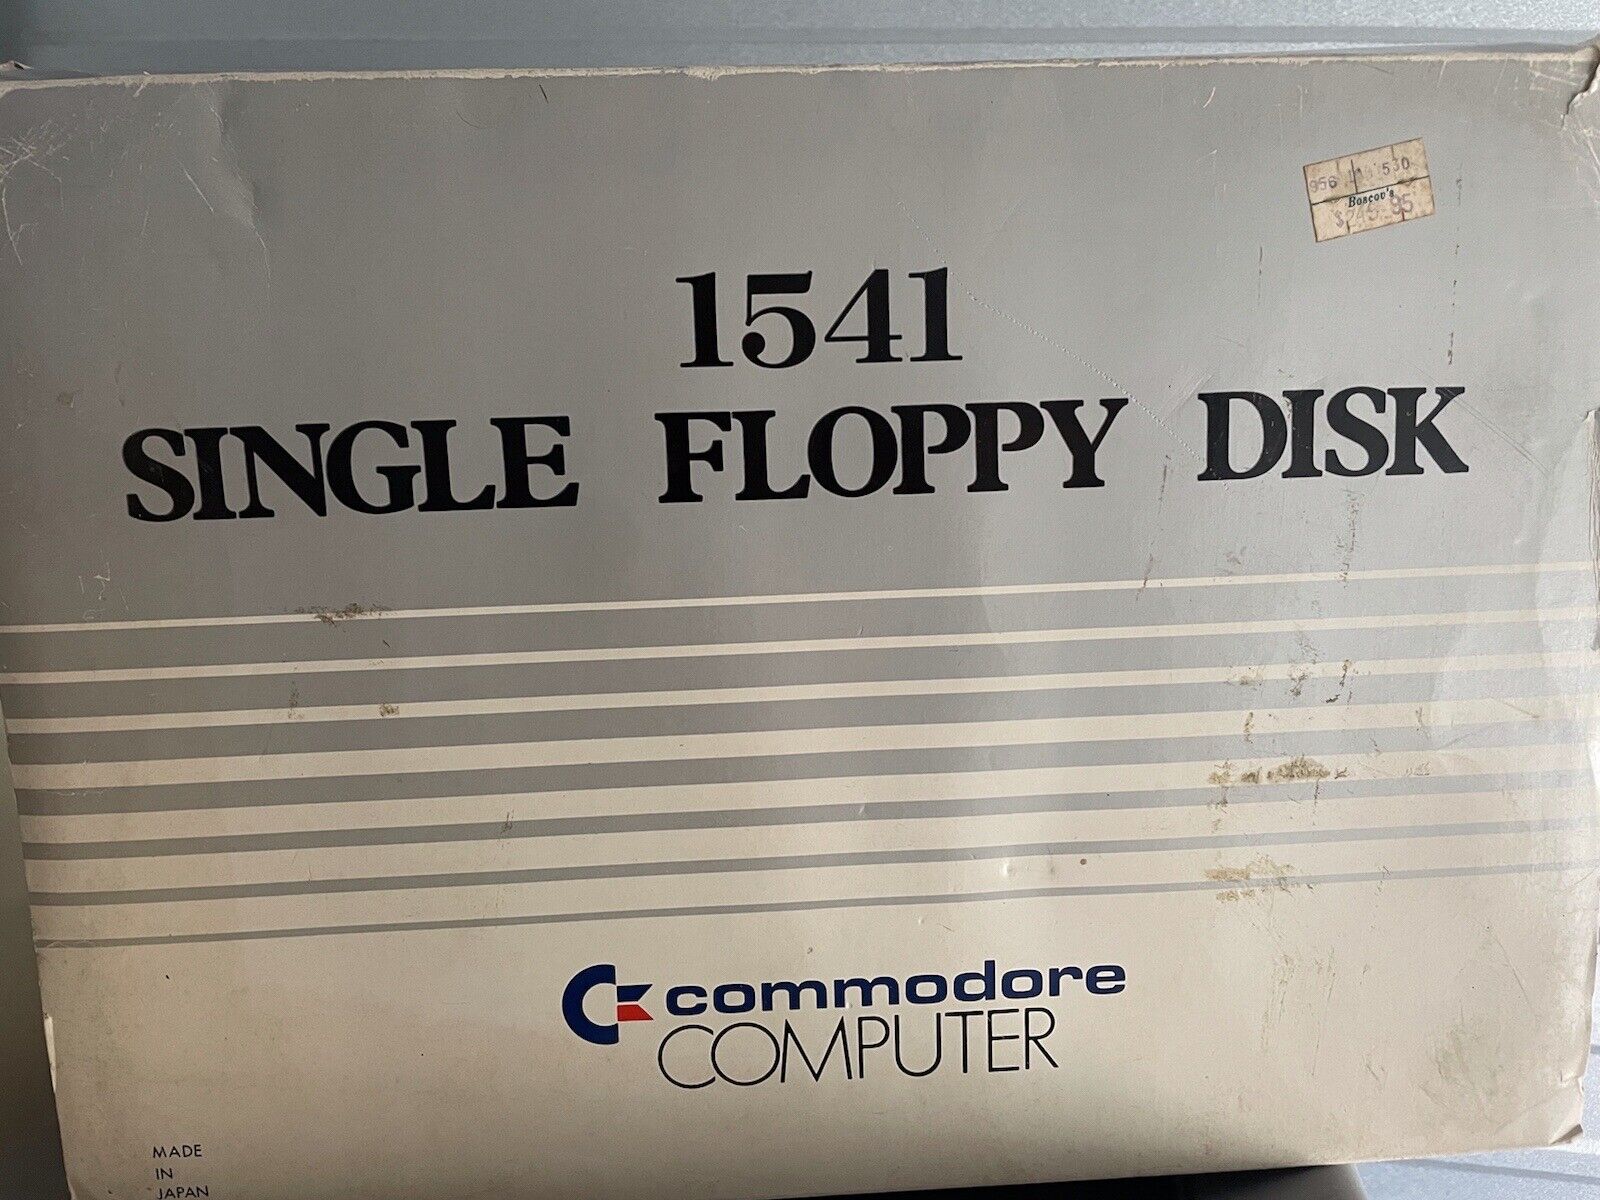 Vintage Commodore Computer Single Floppy Disk Original Packing Includes Disk